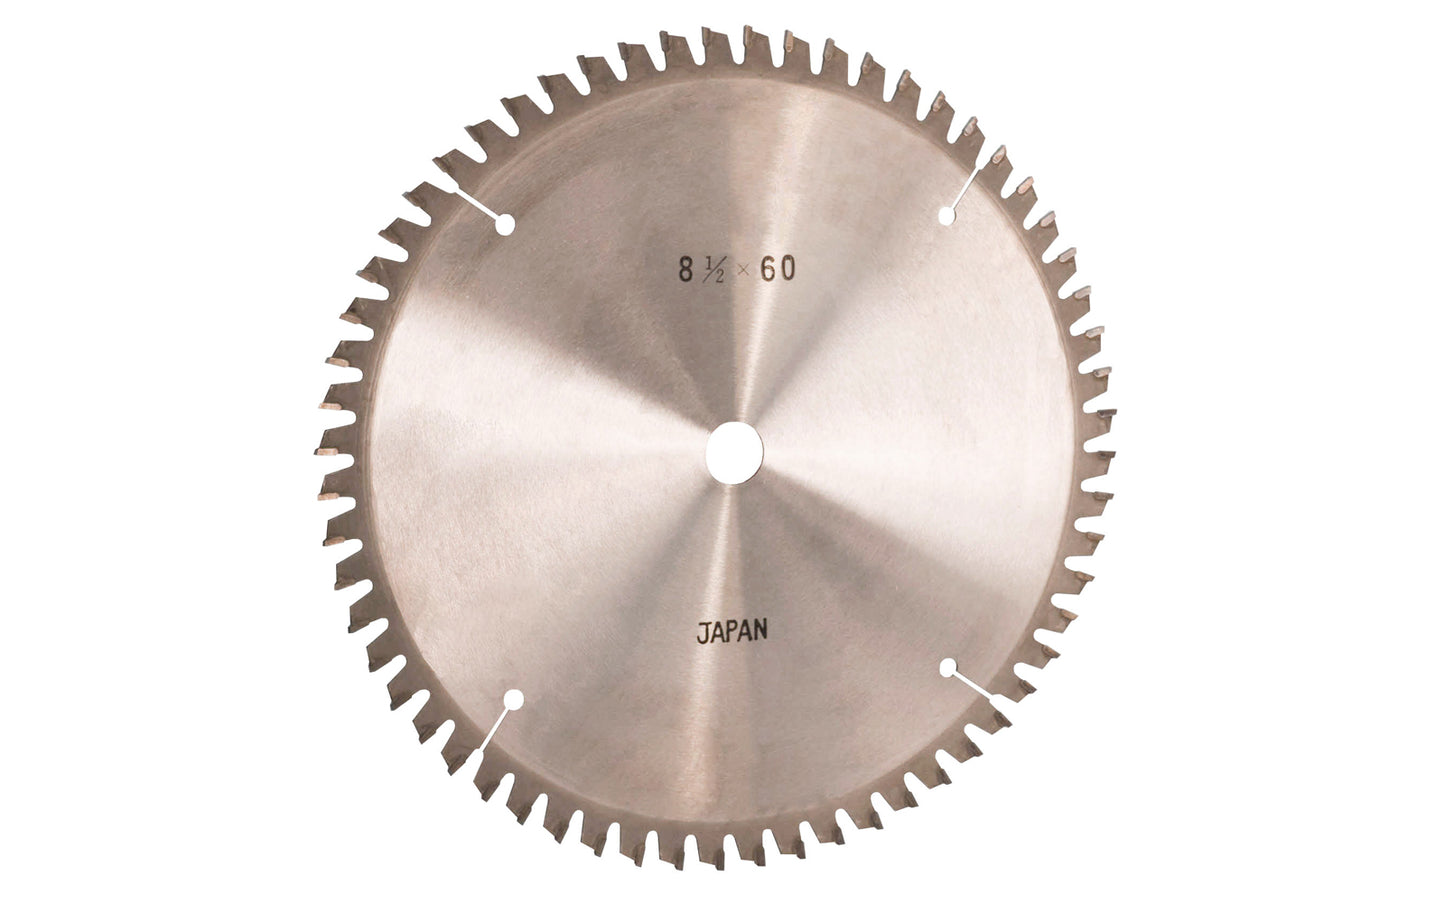 Japanese 8-1/2" thin kerf circular saw blade with carbide teeth made by Sanwa. 60 tooth saw blade for woodworking. Grind: ATB saw blade - Alternate Tooth Bevel style. 0.09" thin kerf. Sanwa model SB 8560Z. Made in Japan.